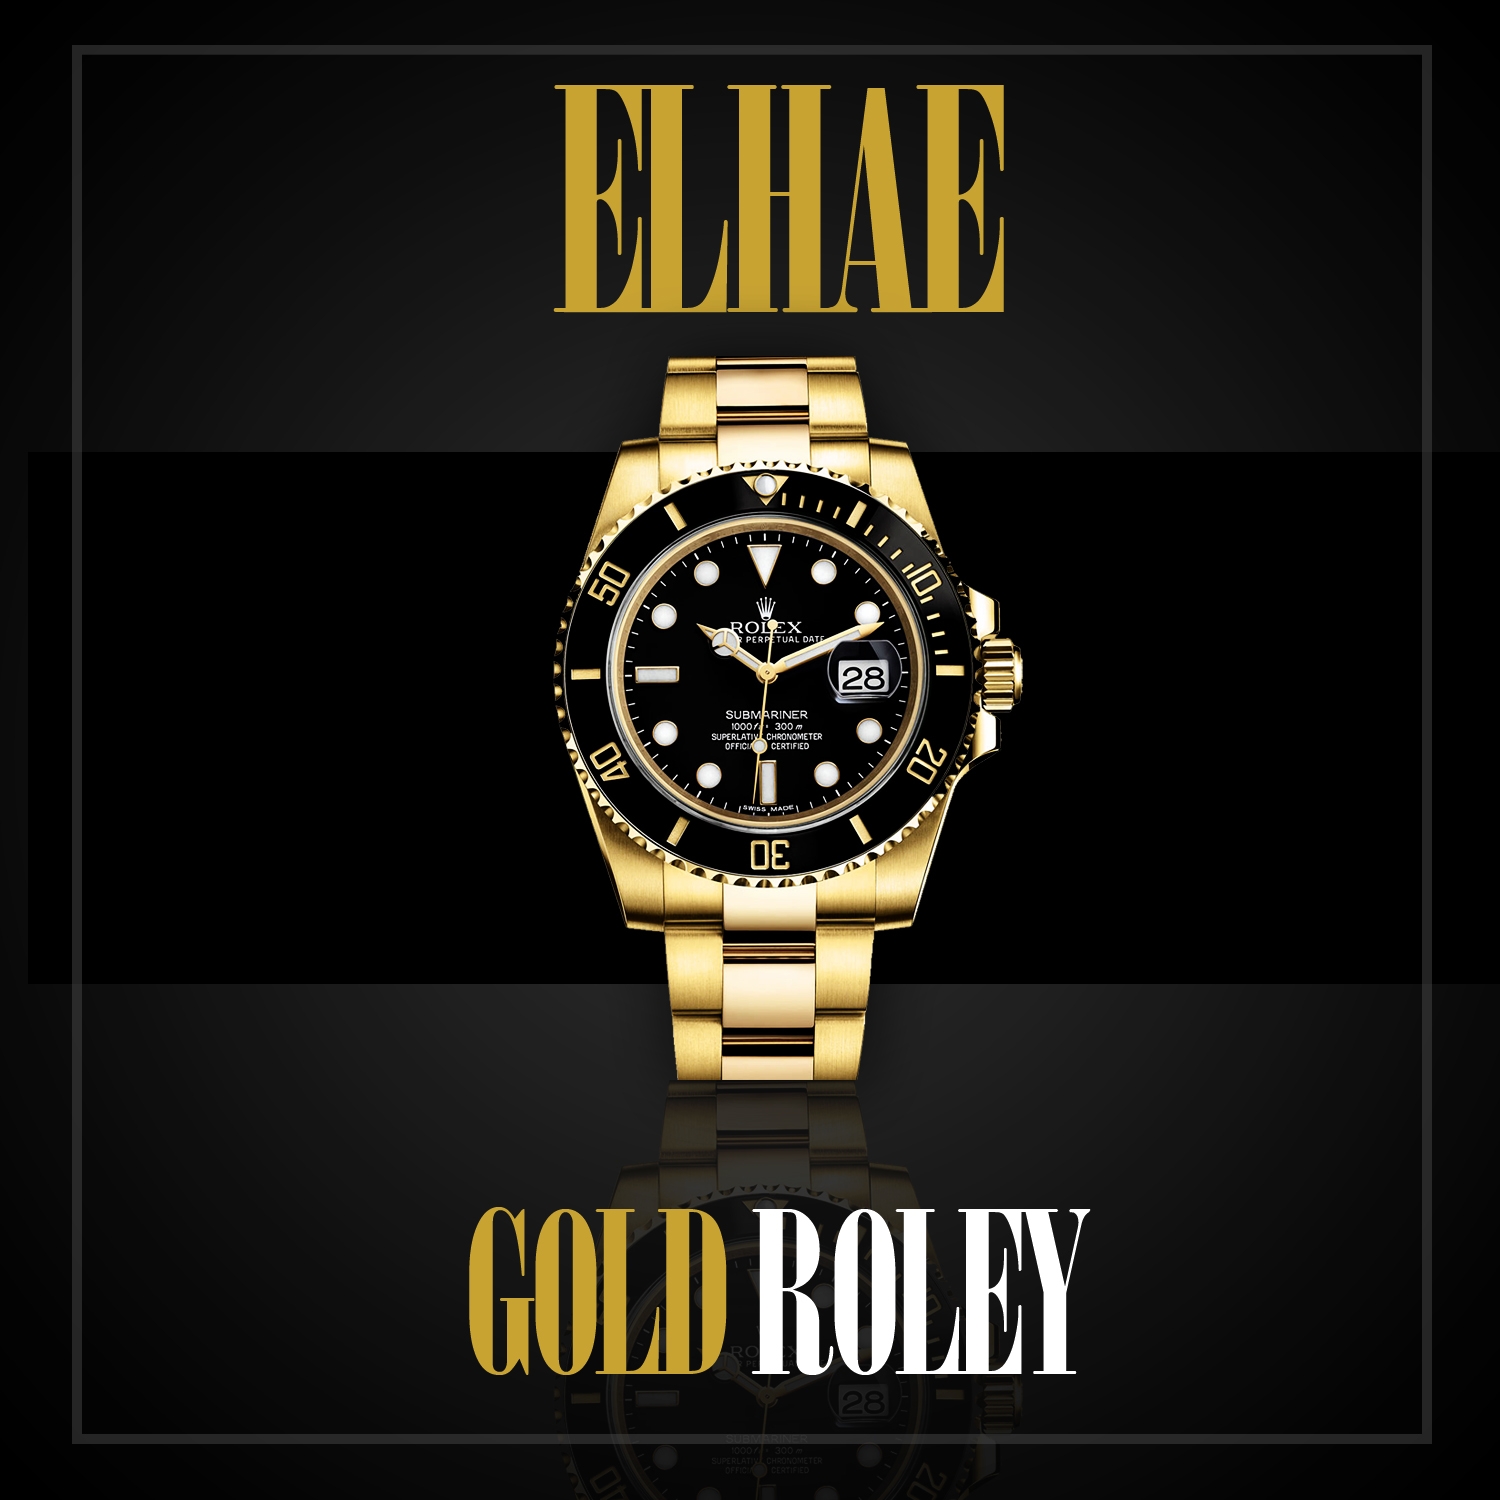 Gold Roley